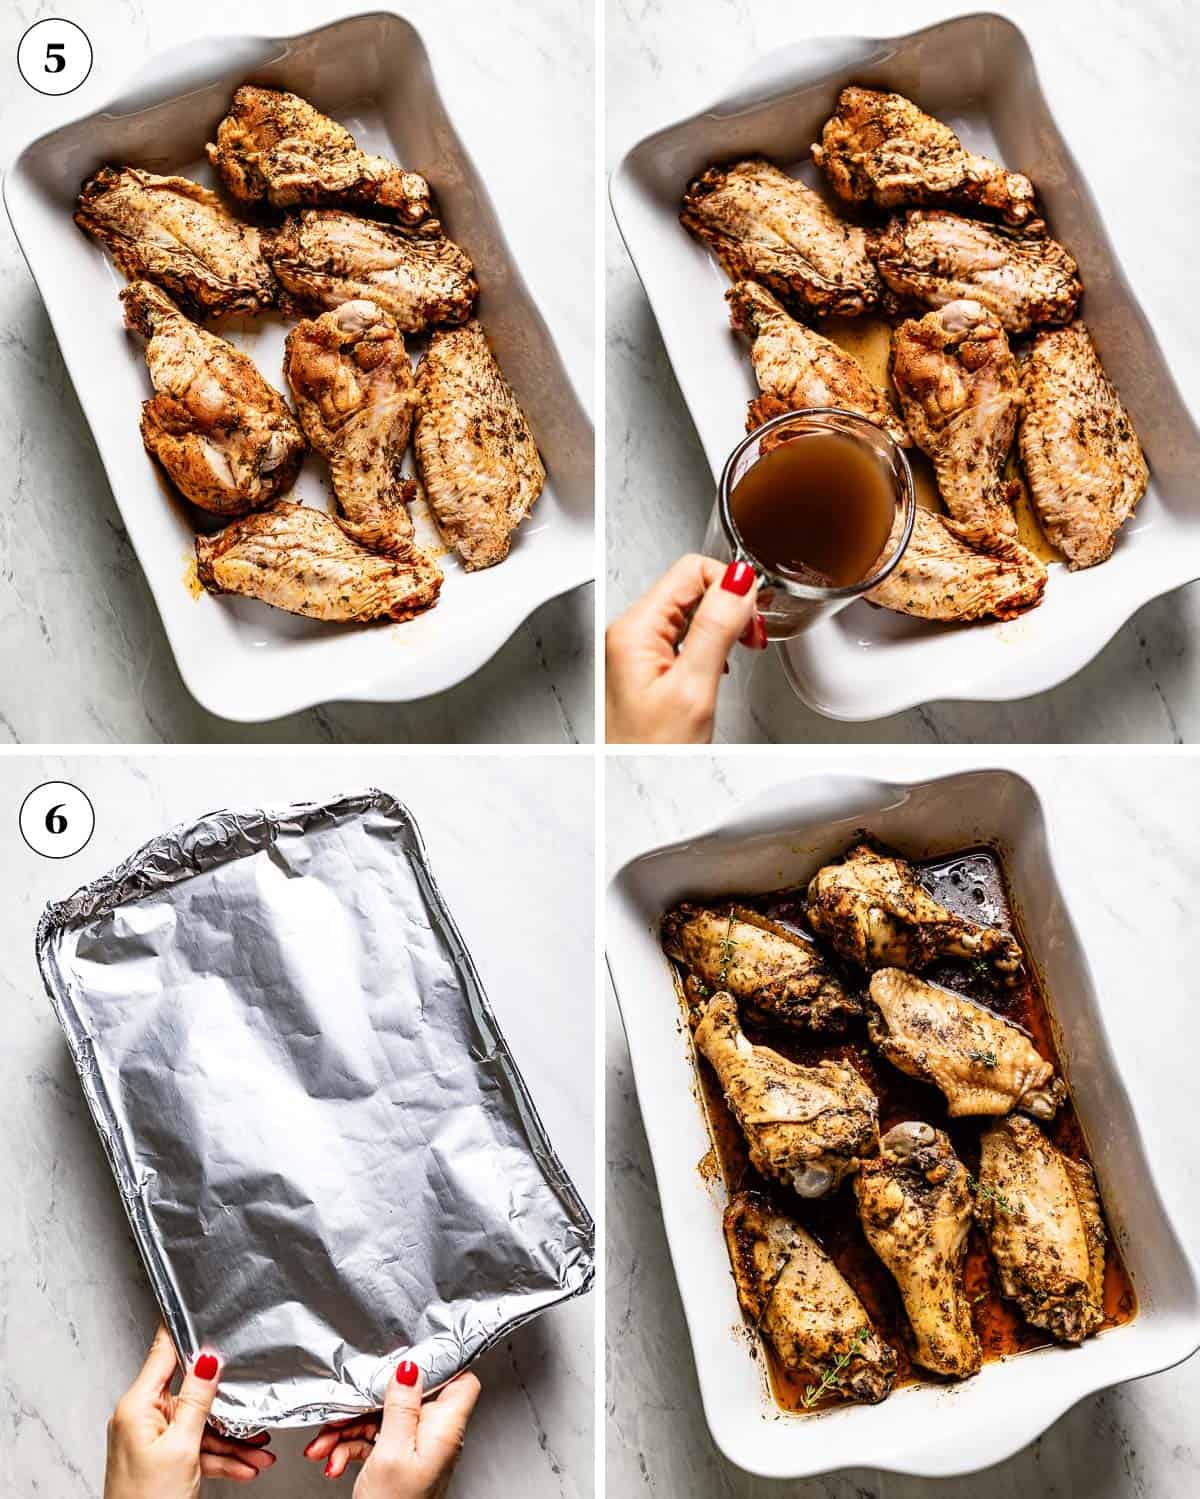 Step by step images showing how to make turkey wings fall off the bone.